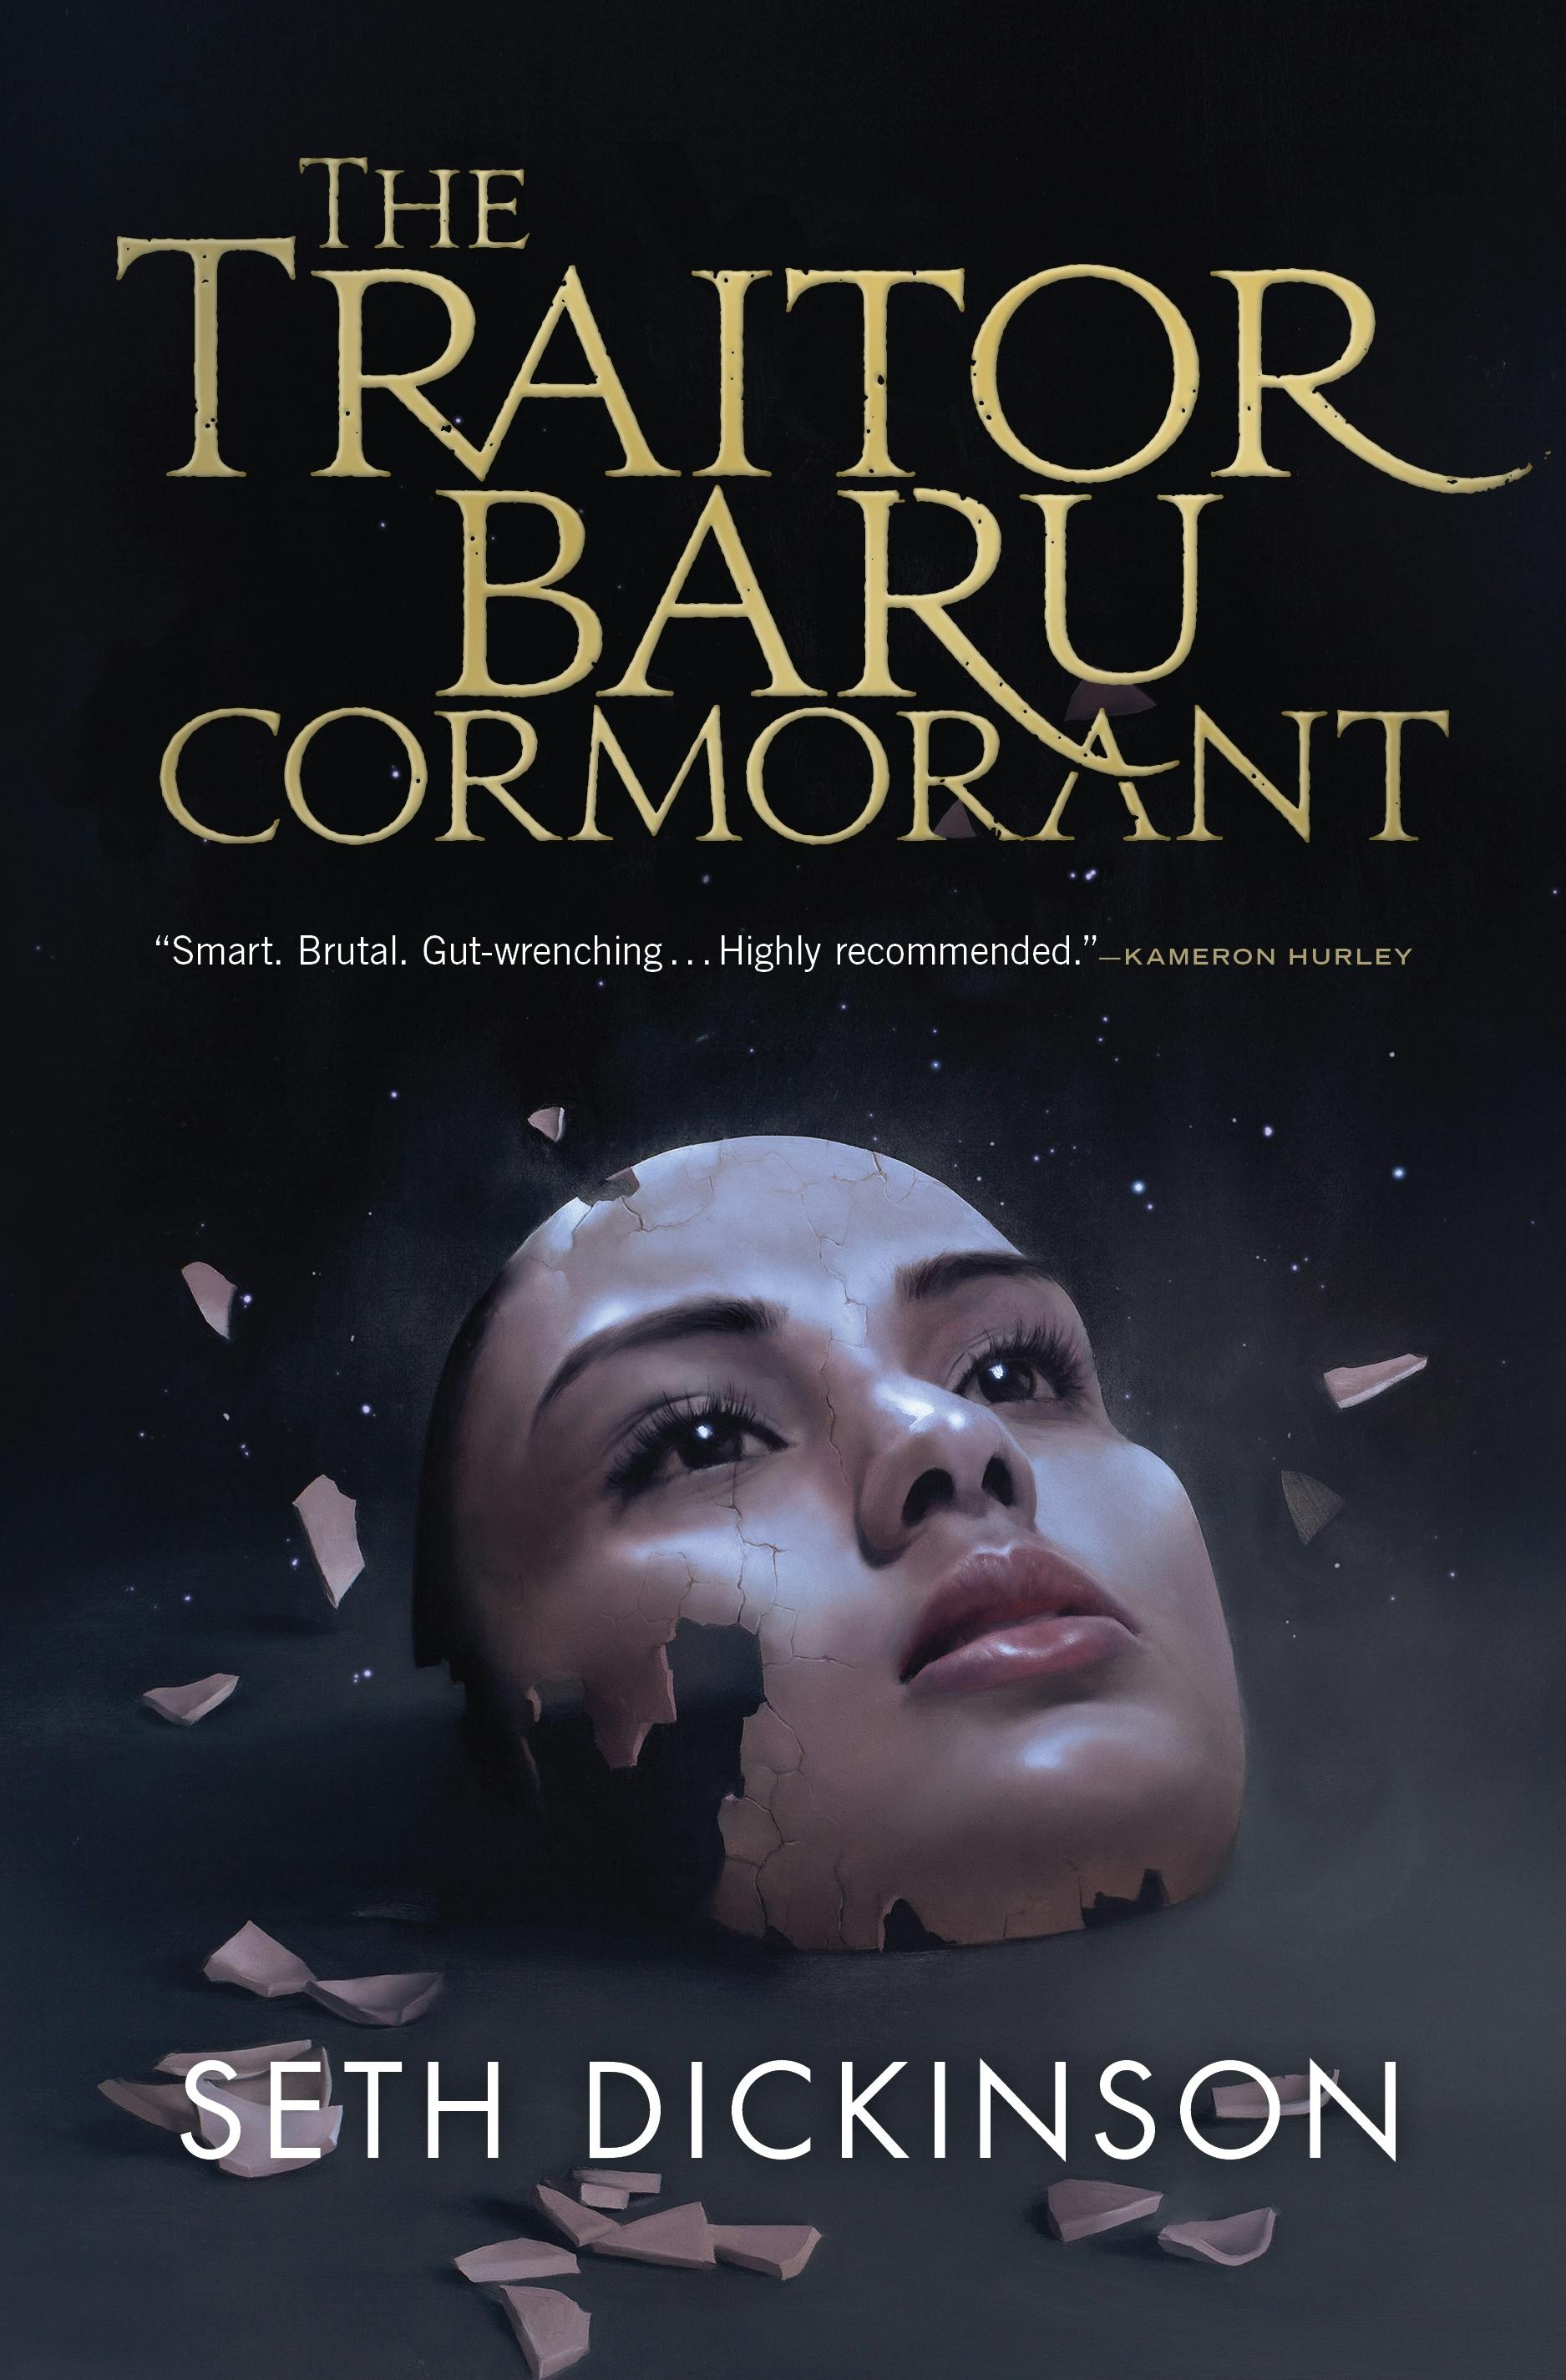 Cover for the book titled as: The Traitor Baru Cormorant